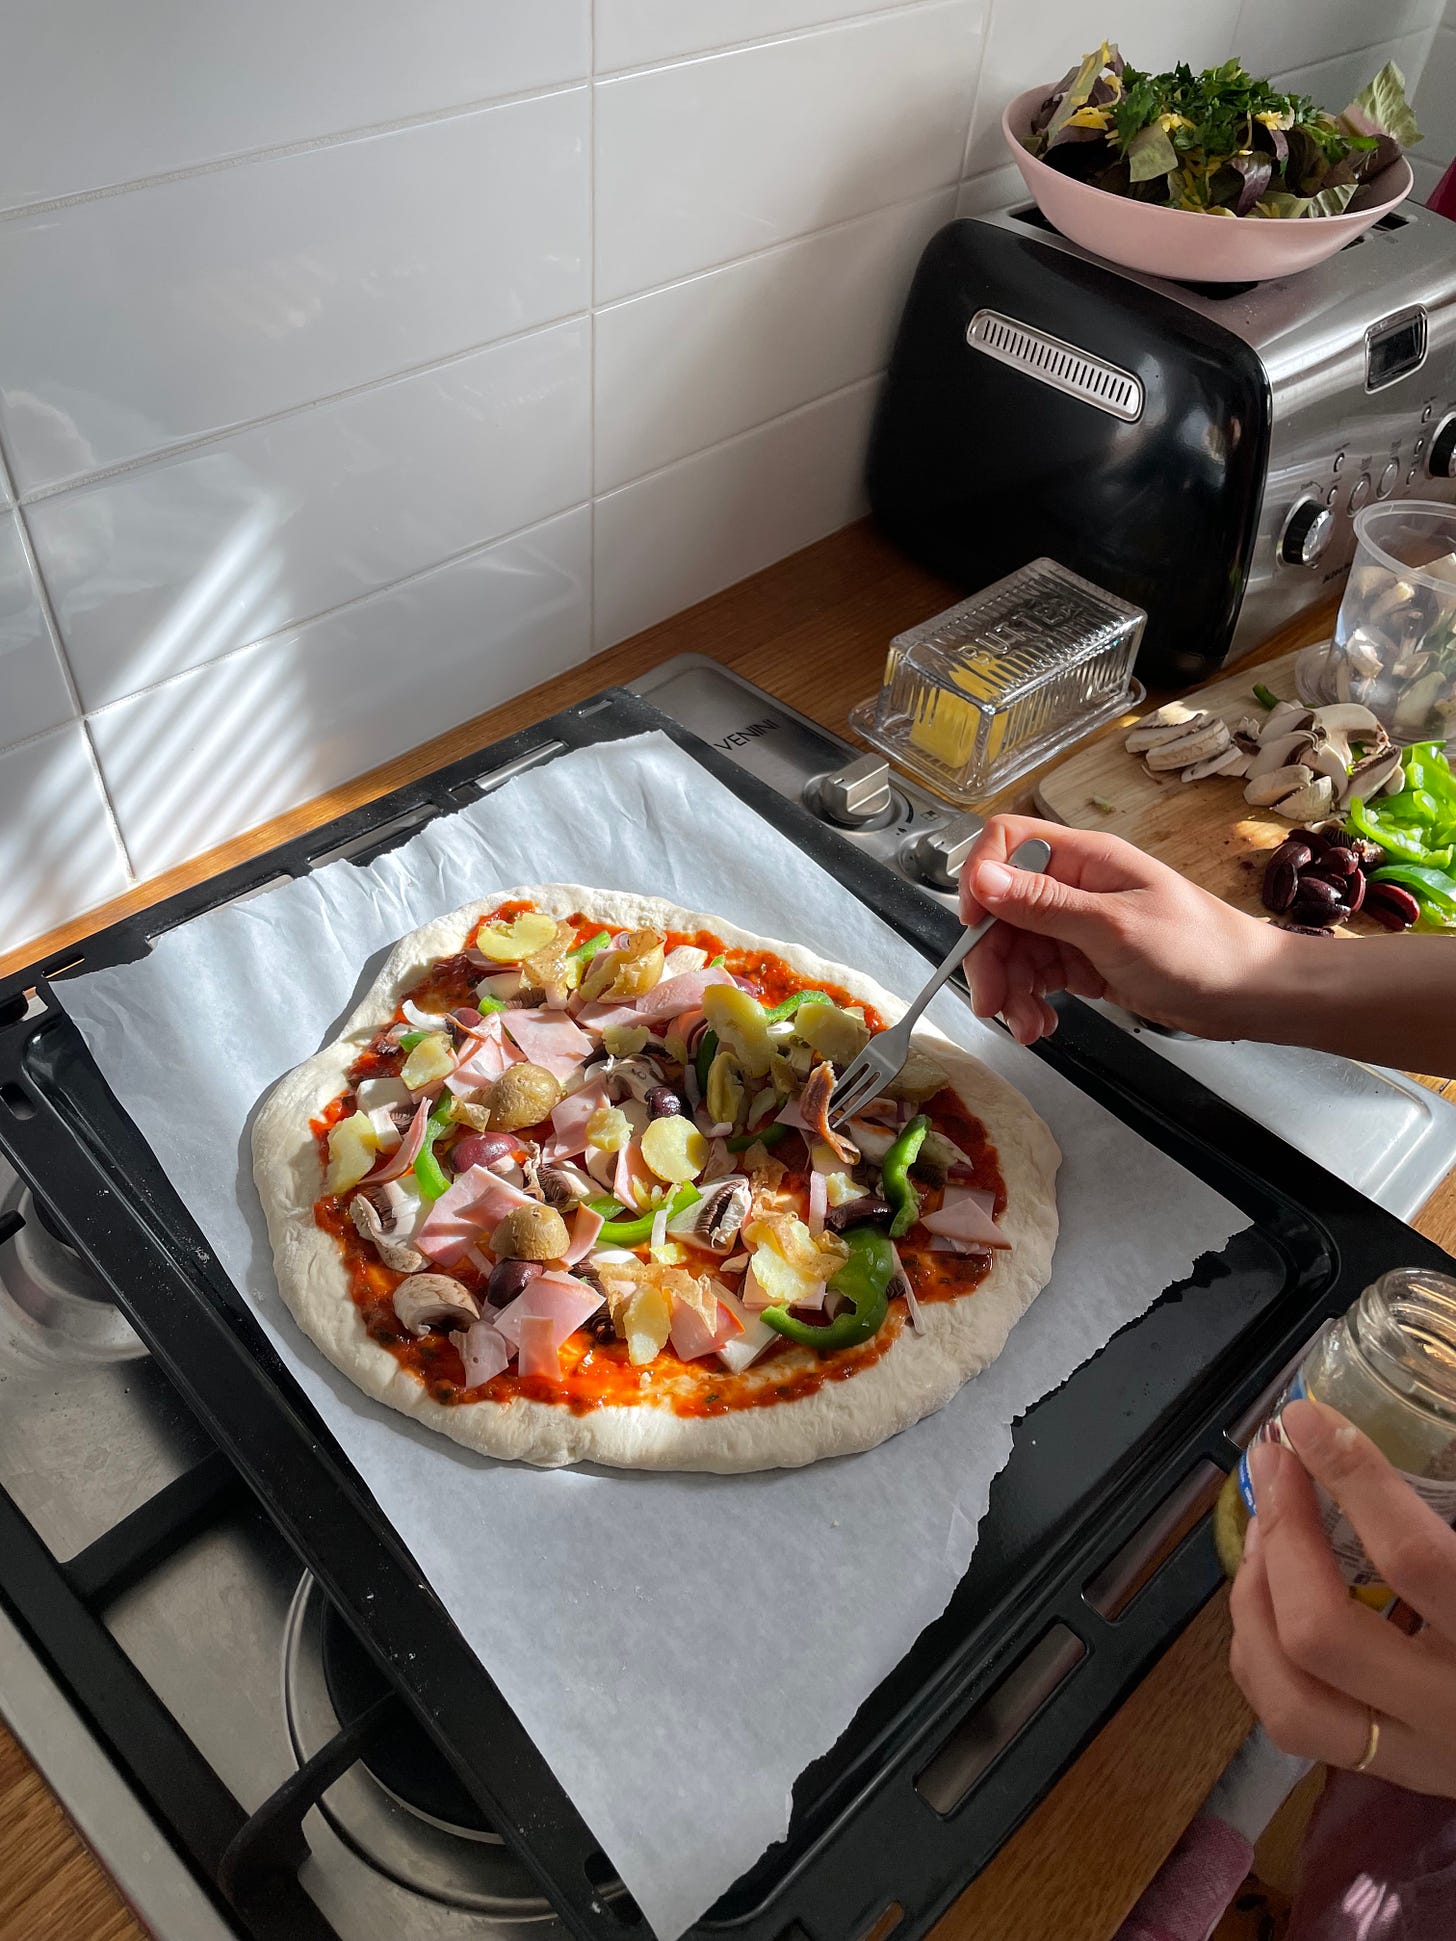 Uncooked pizza topped with a tomato sauce, vegetables on a baking tray, with someone putting olives on top.